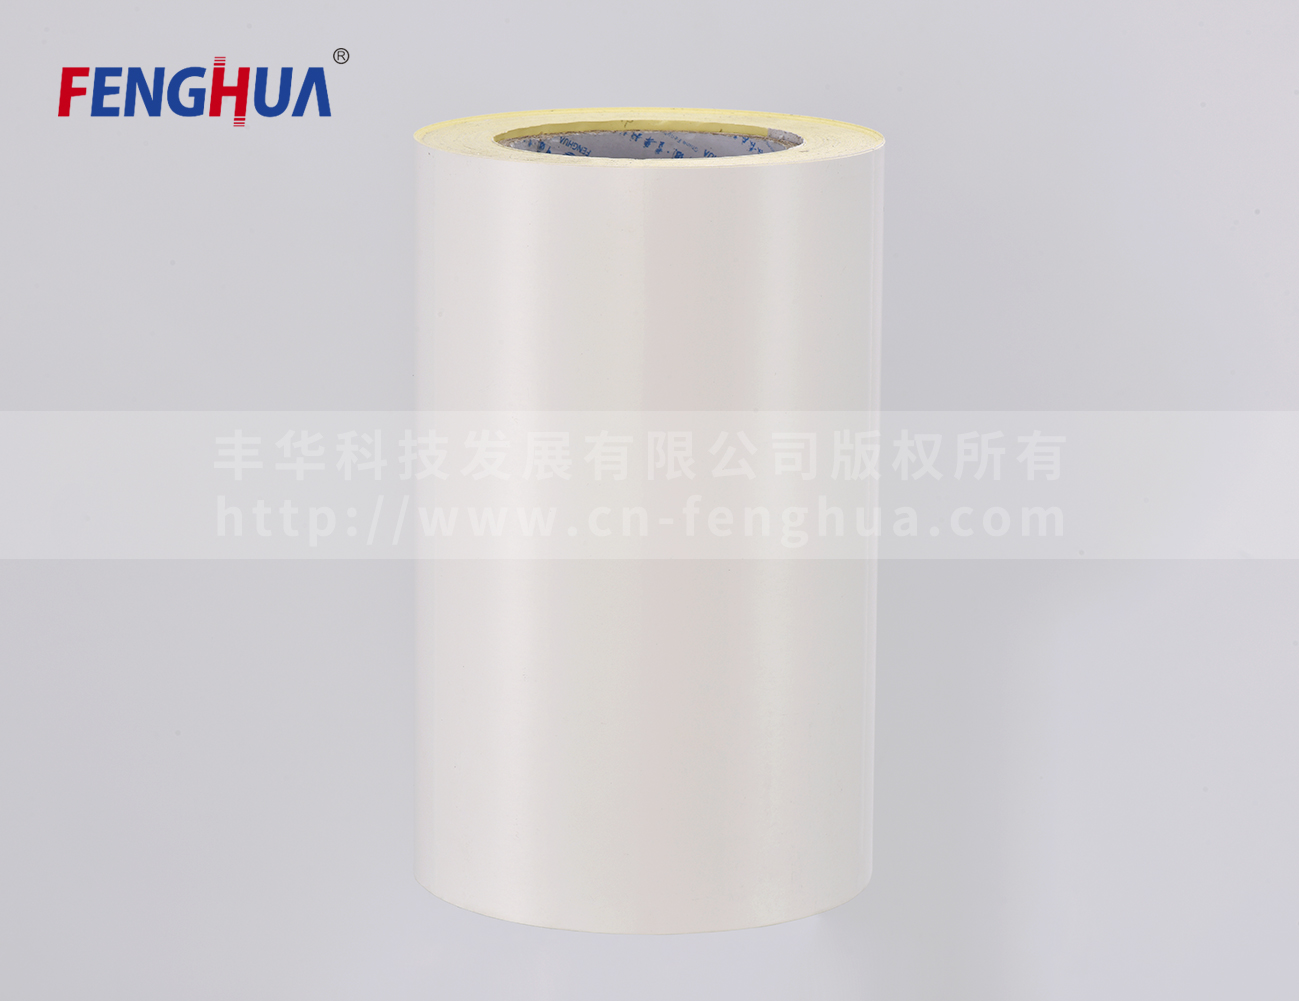 Glossy cast coated paper